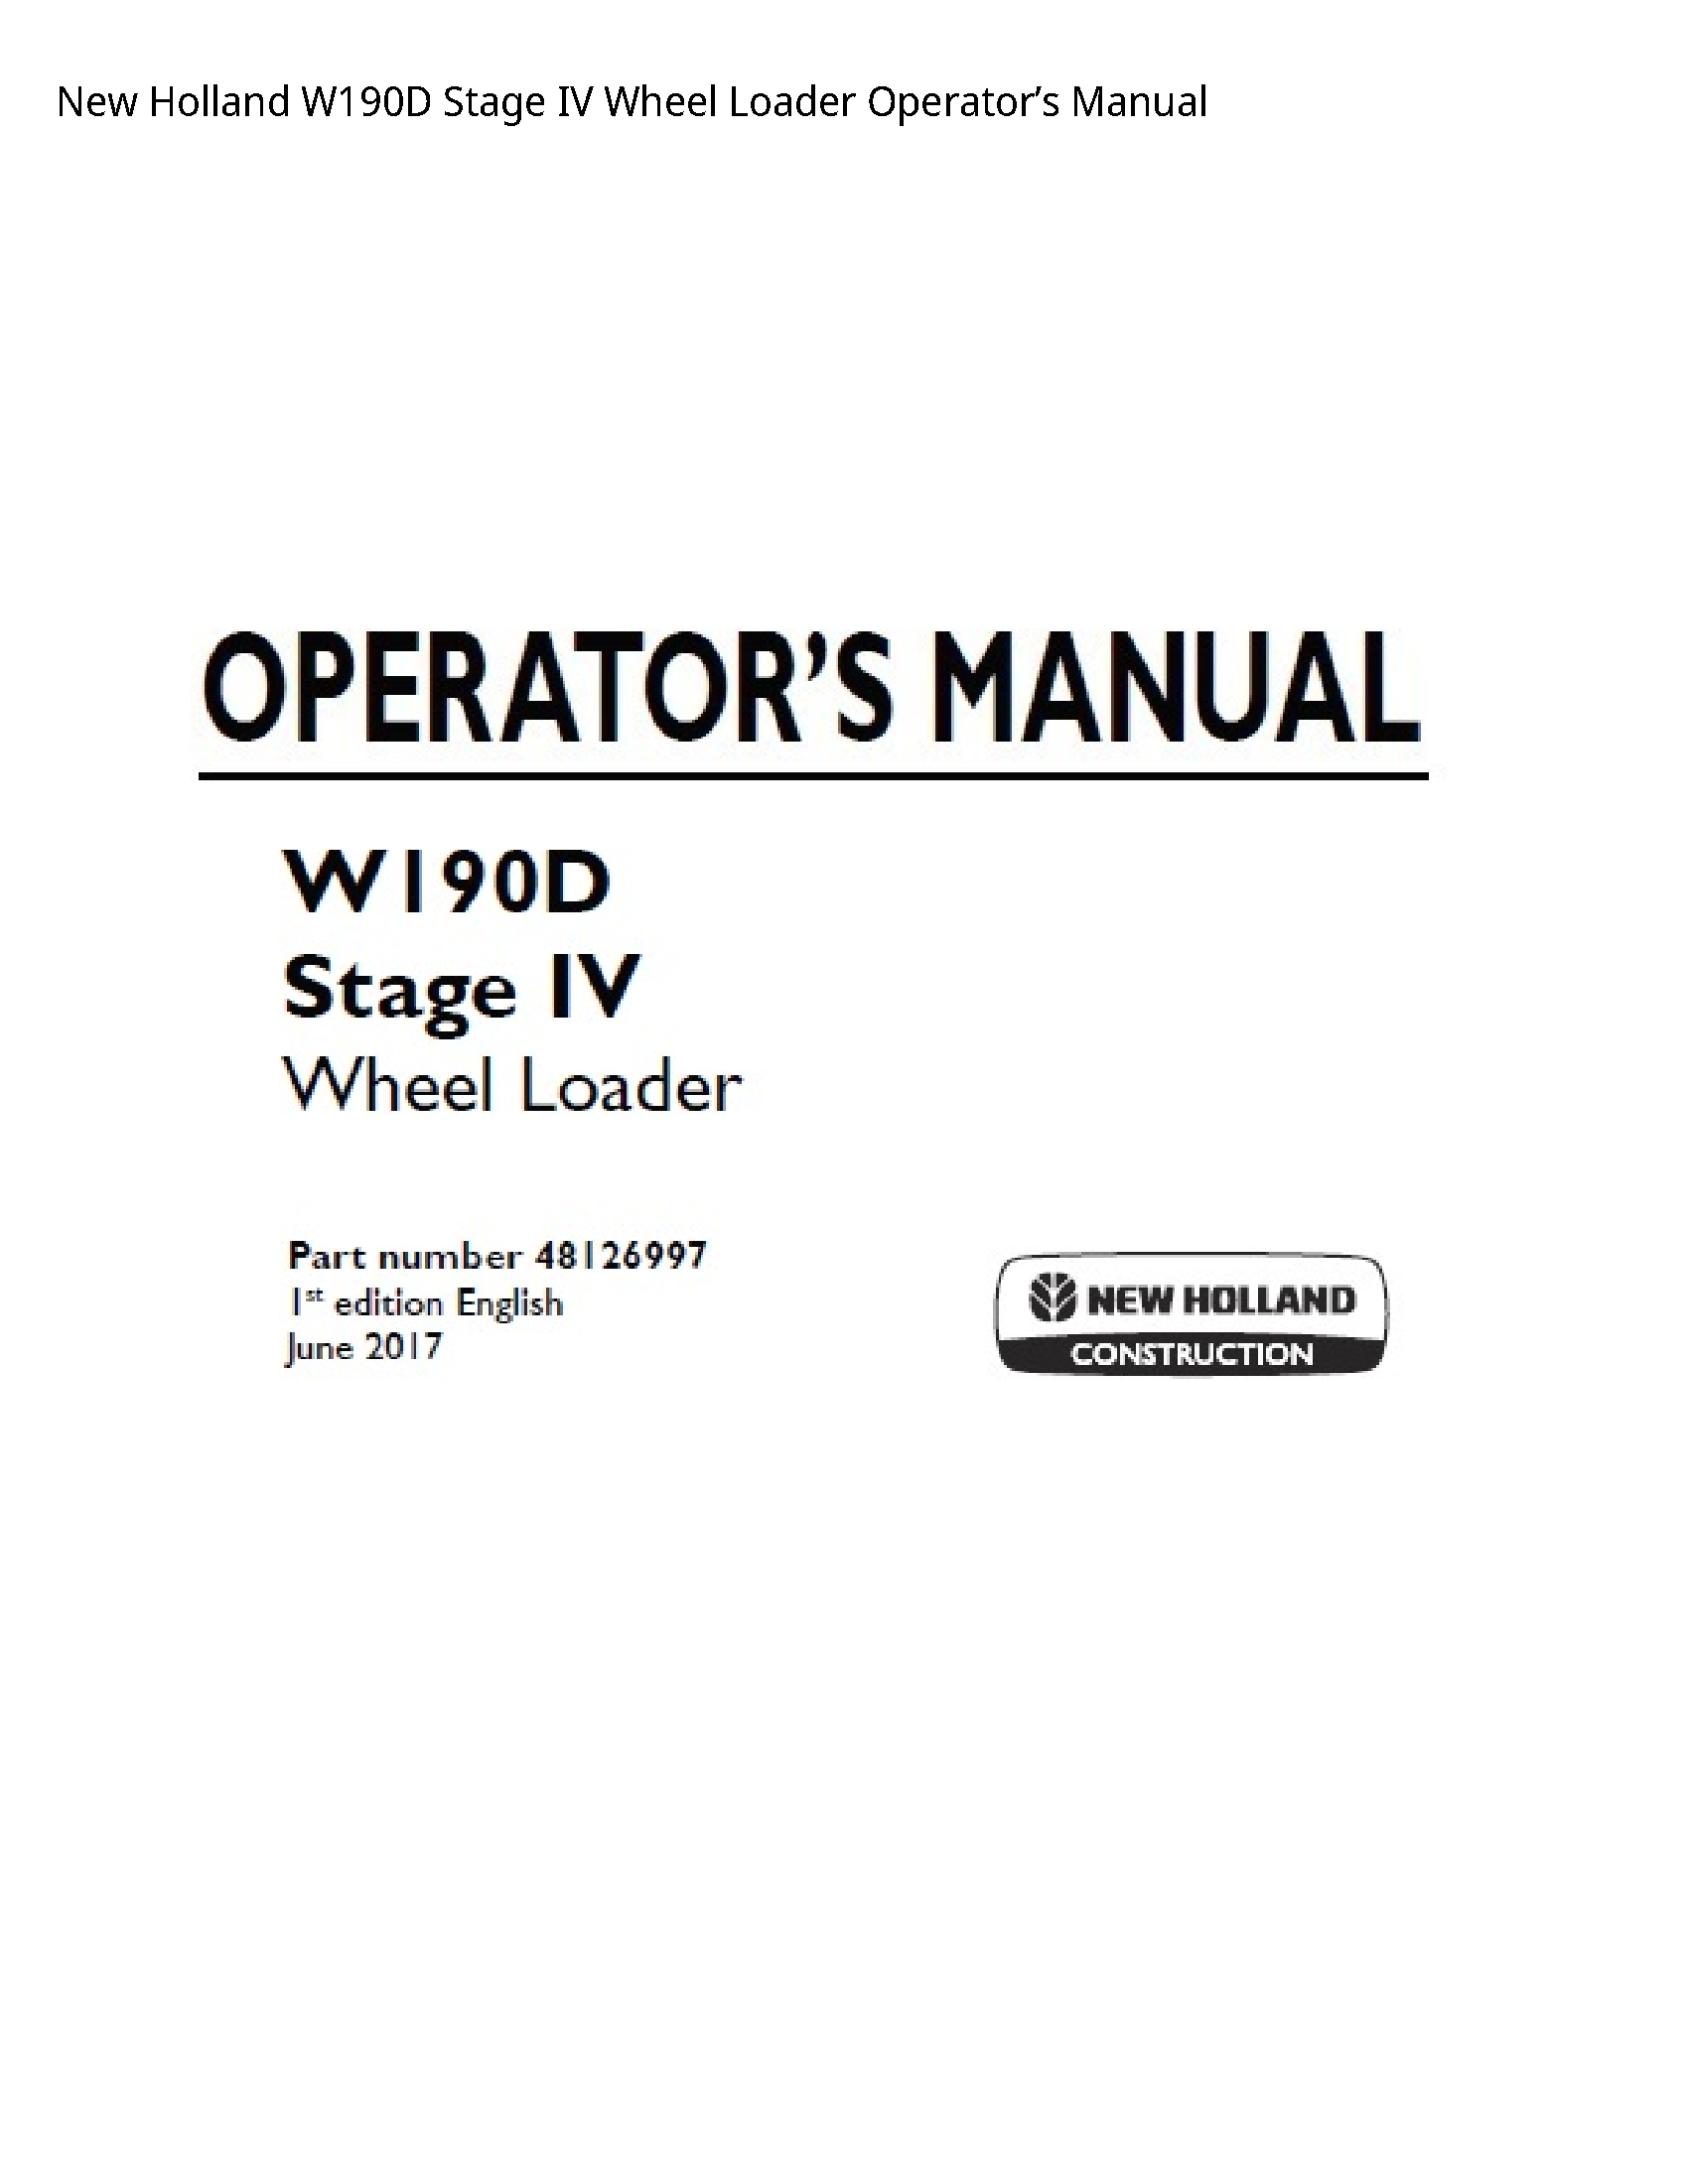 New Holland W190D Stage IV Wheel Loader Operator’s manual